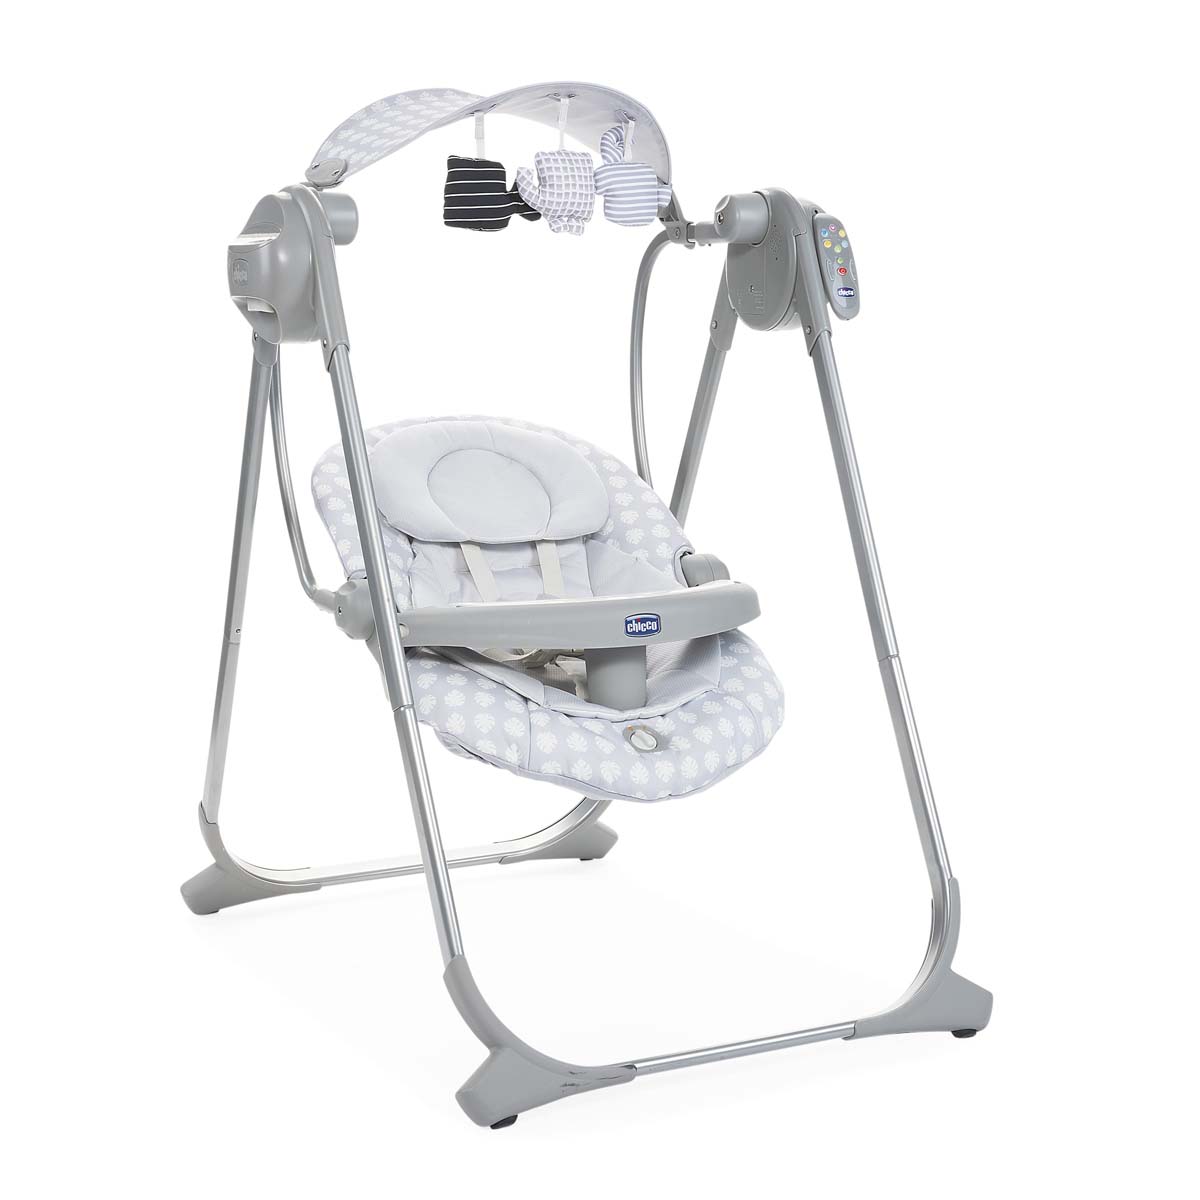 Altalena polly swing up leaf - Chicco